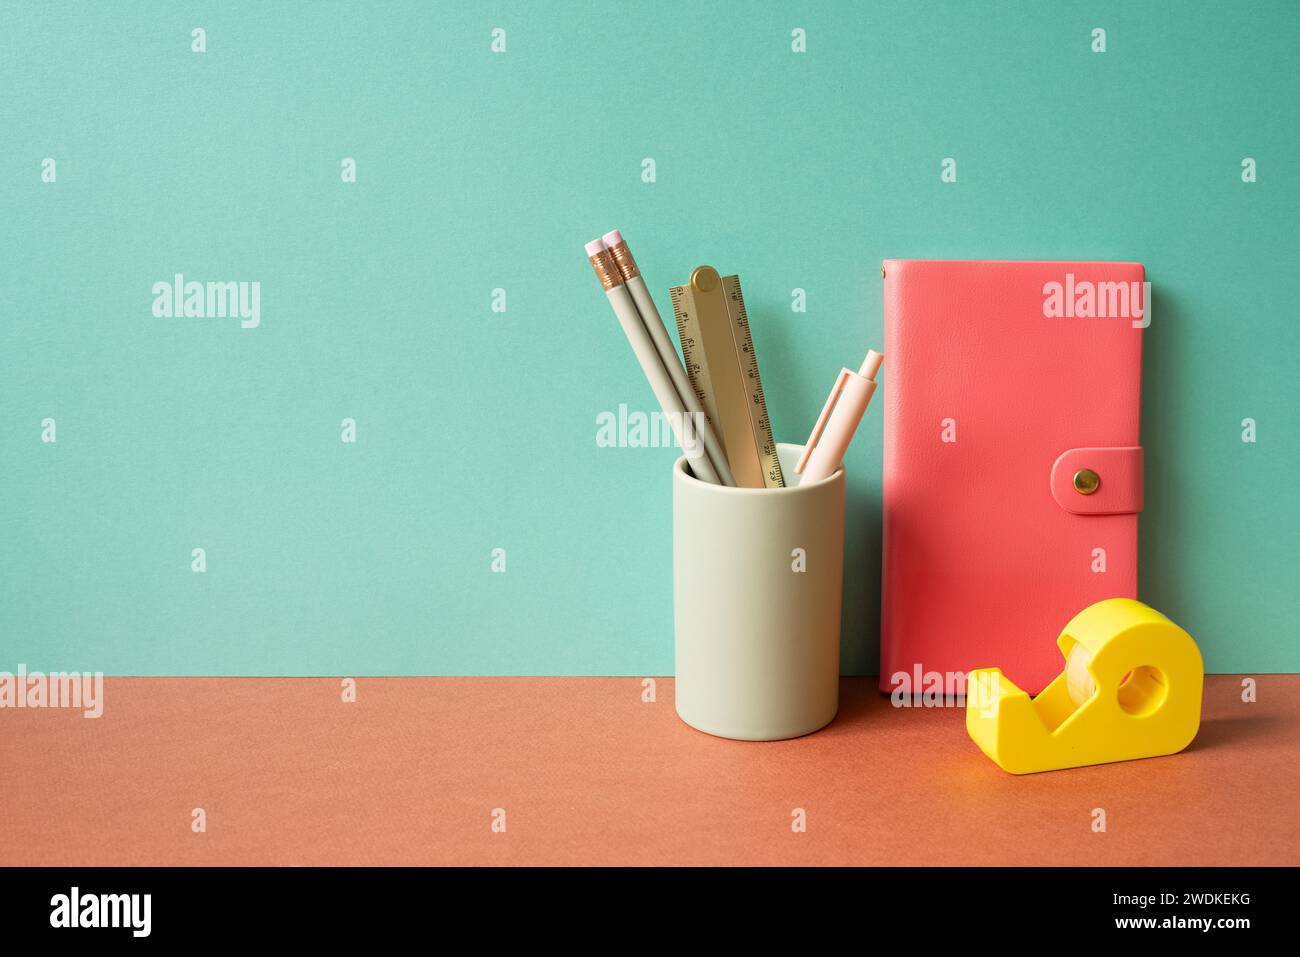 Pink diary notebook and writing supplies stationery in holder on red desk. mint green wall background Stock Photo